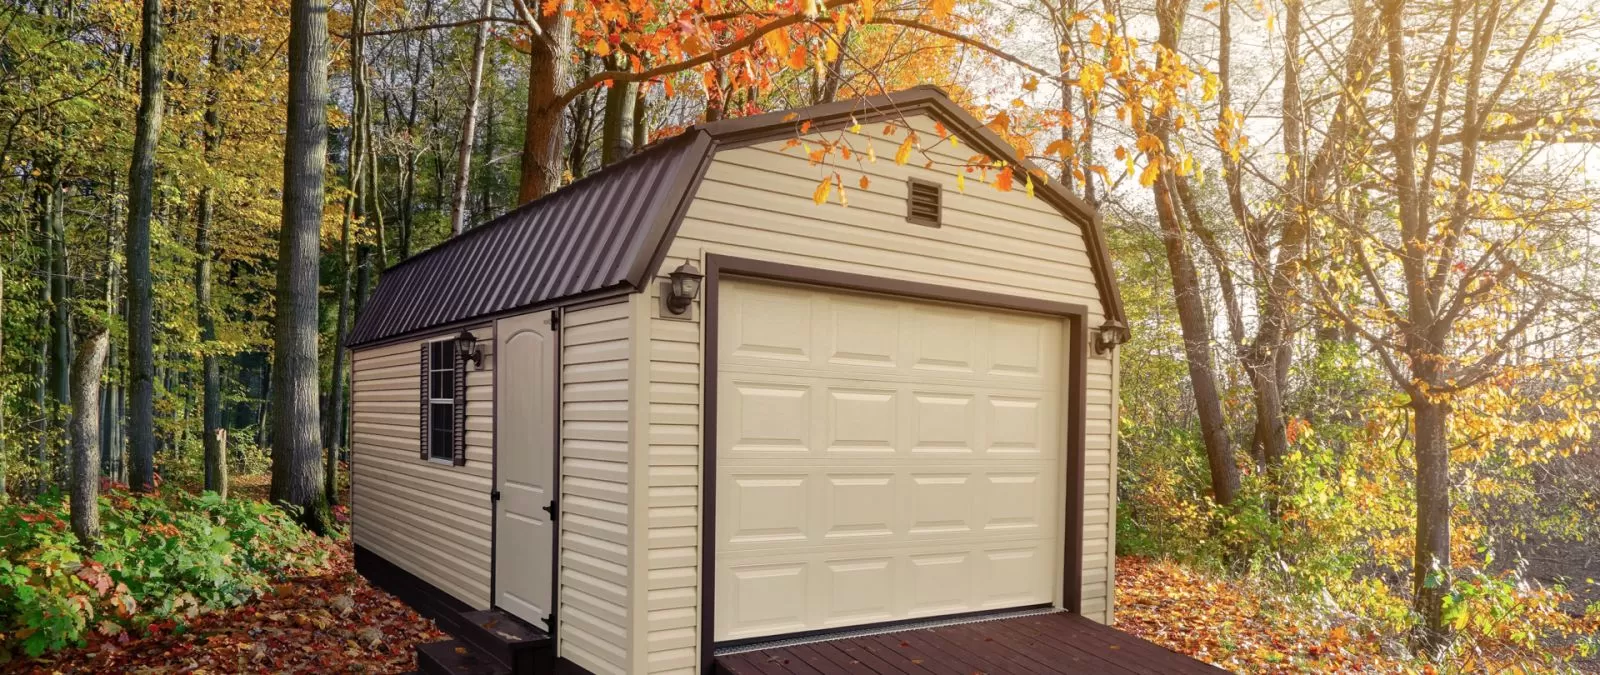 A custom prebuilt garage in Tennessee with brown vinyl siding and a loft